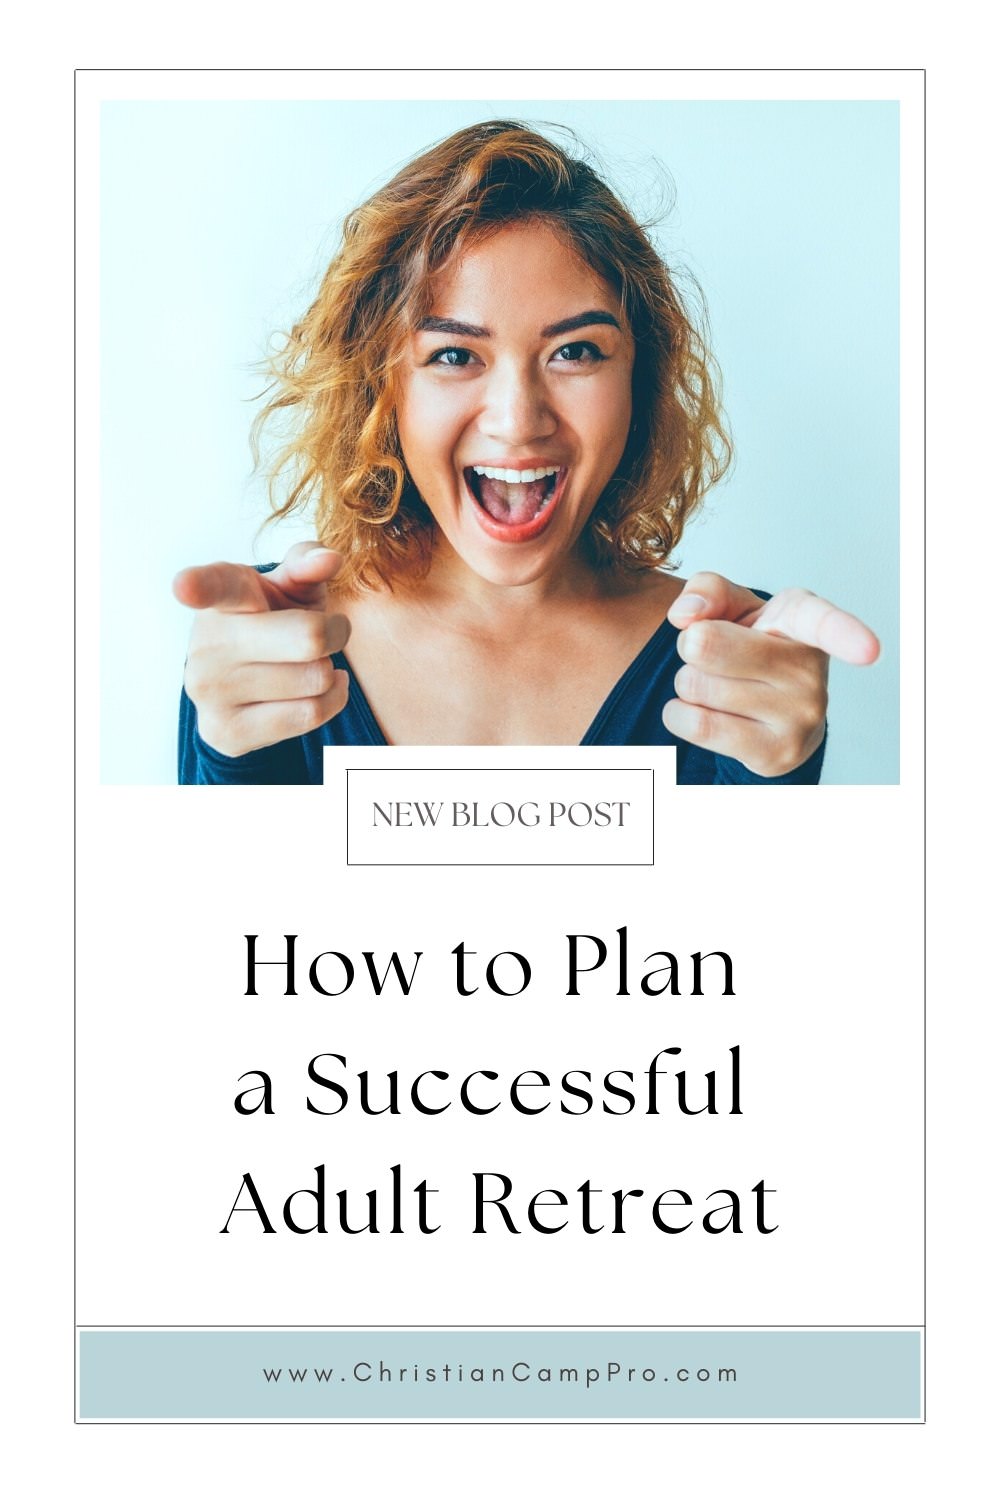 Planning an Adult Retreat